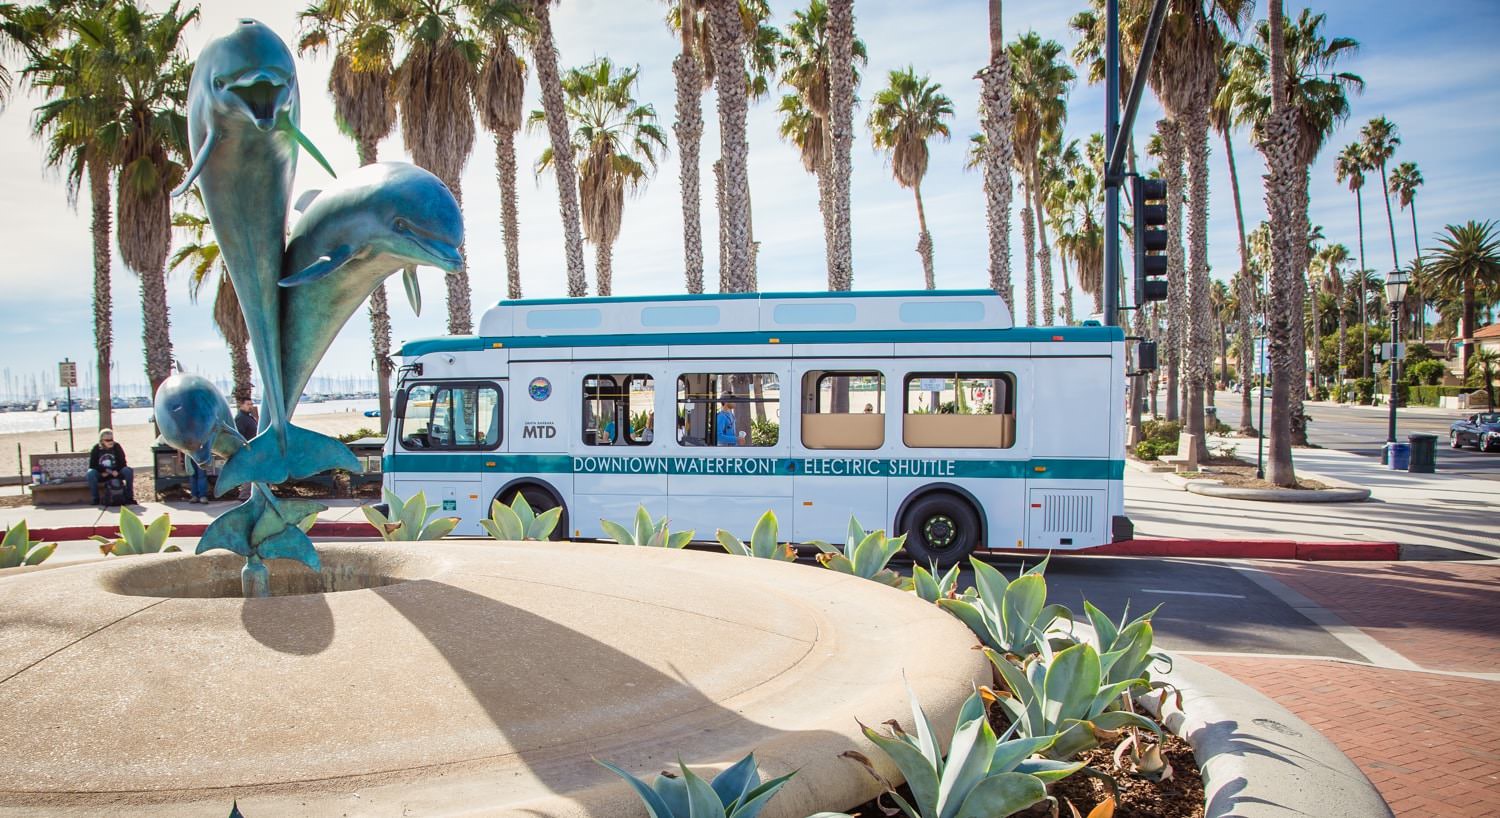 White and turquoise shuttle bus riving around Santa Barbara amidst palm trees and harbor views